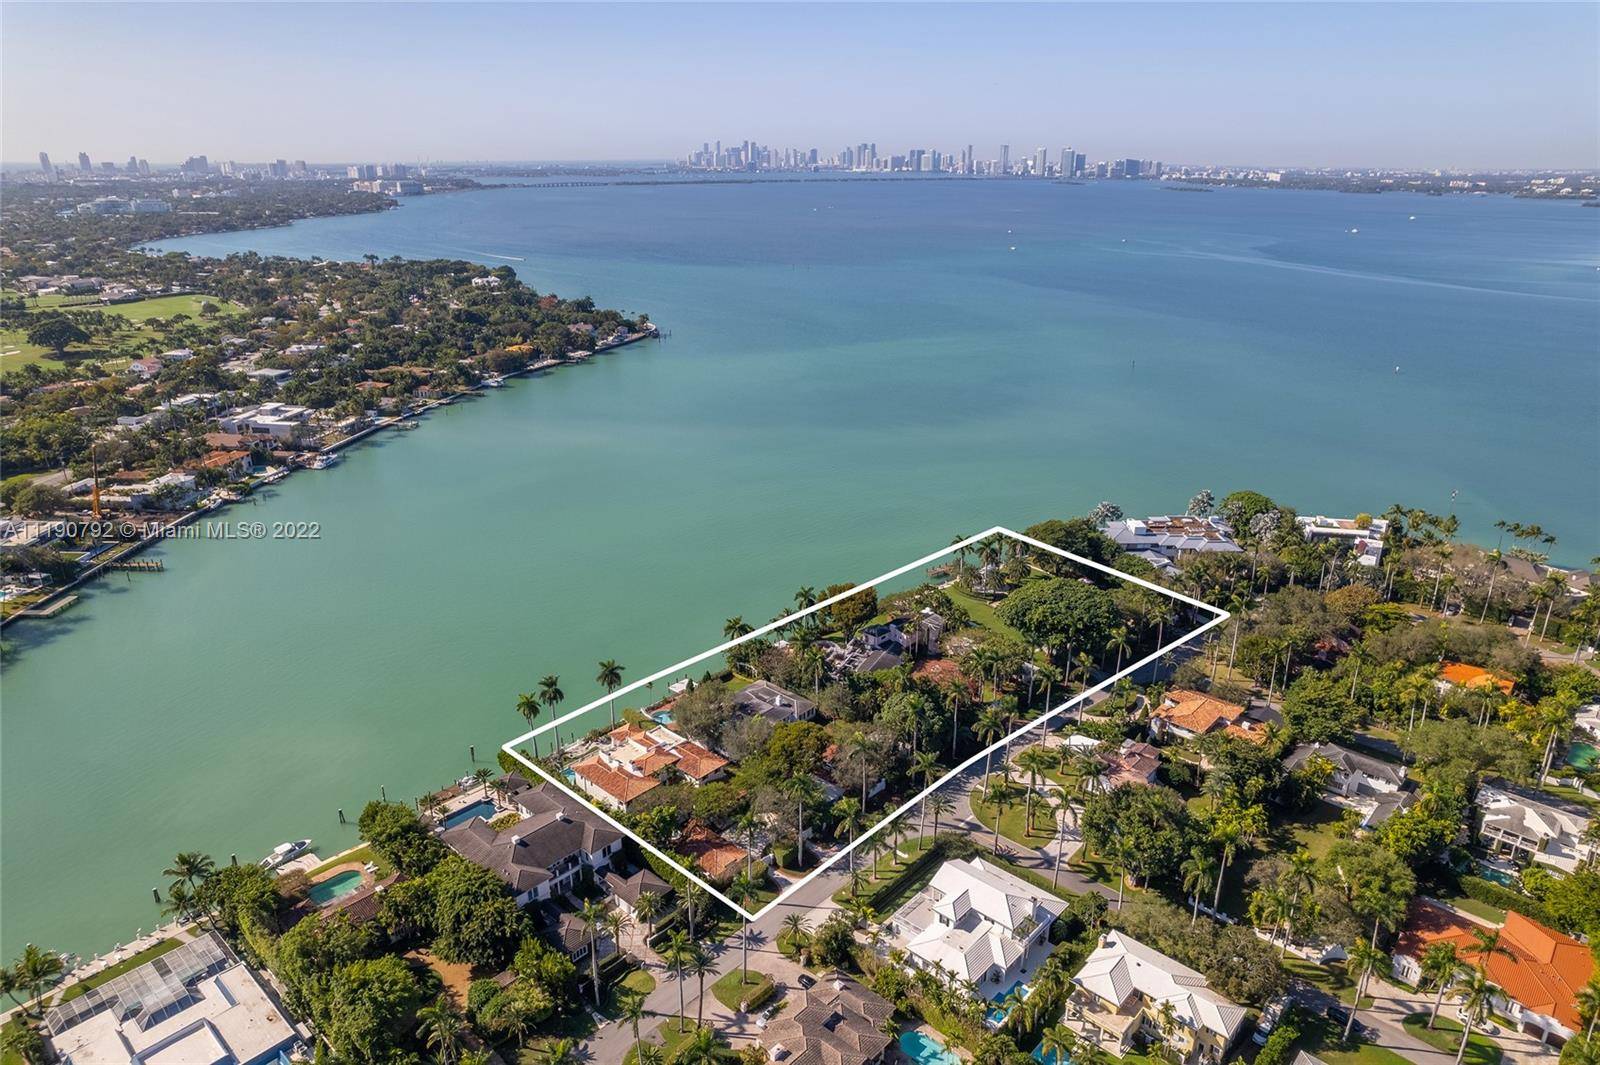 This is a once in a lifetime opportunity to own 125, 161 SF on prestigious, guard gated La Gorce Island.